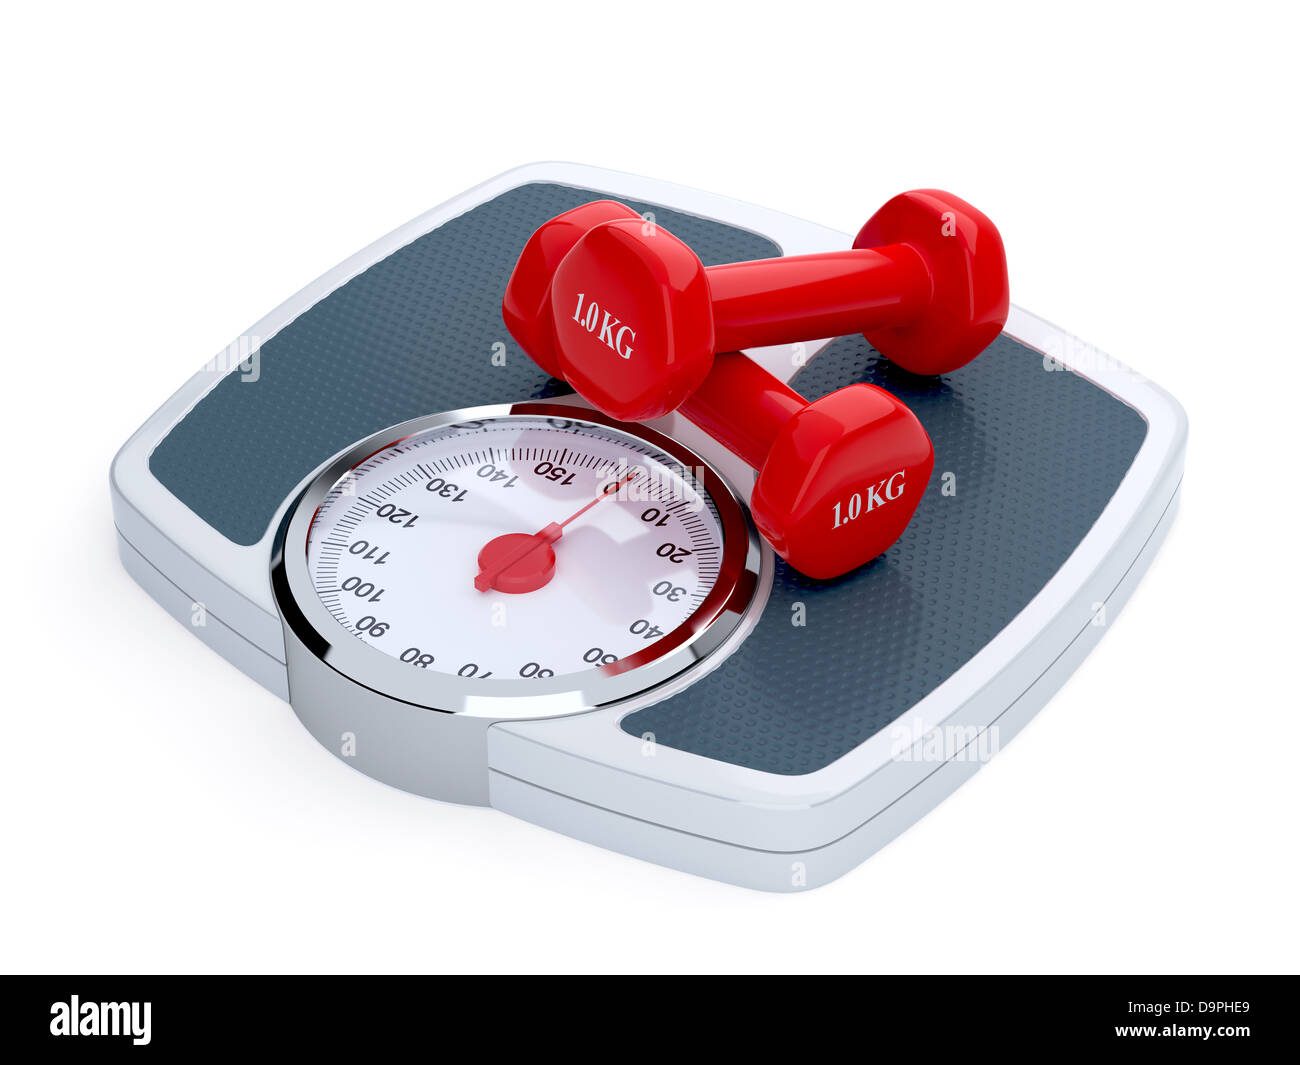 https://c8.alamy.com/comp/D9PHE9/3d-render-of-weight-scale-with-red-dumbbells-isolated-on-white-background-D9PHE9.jpg